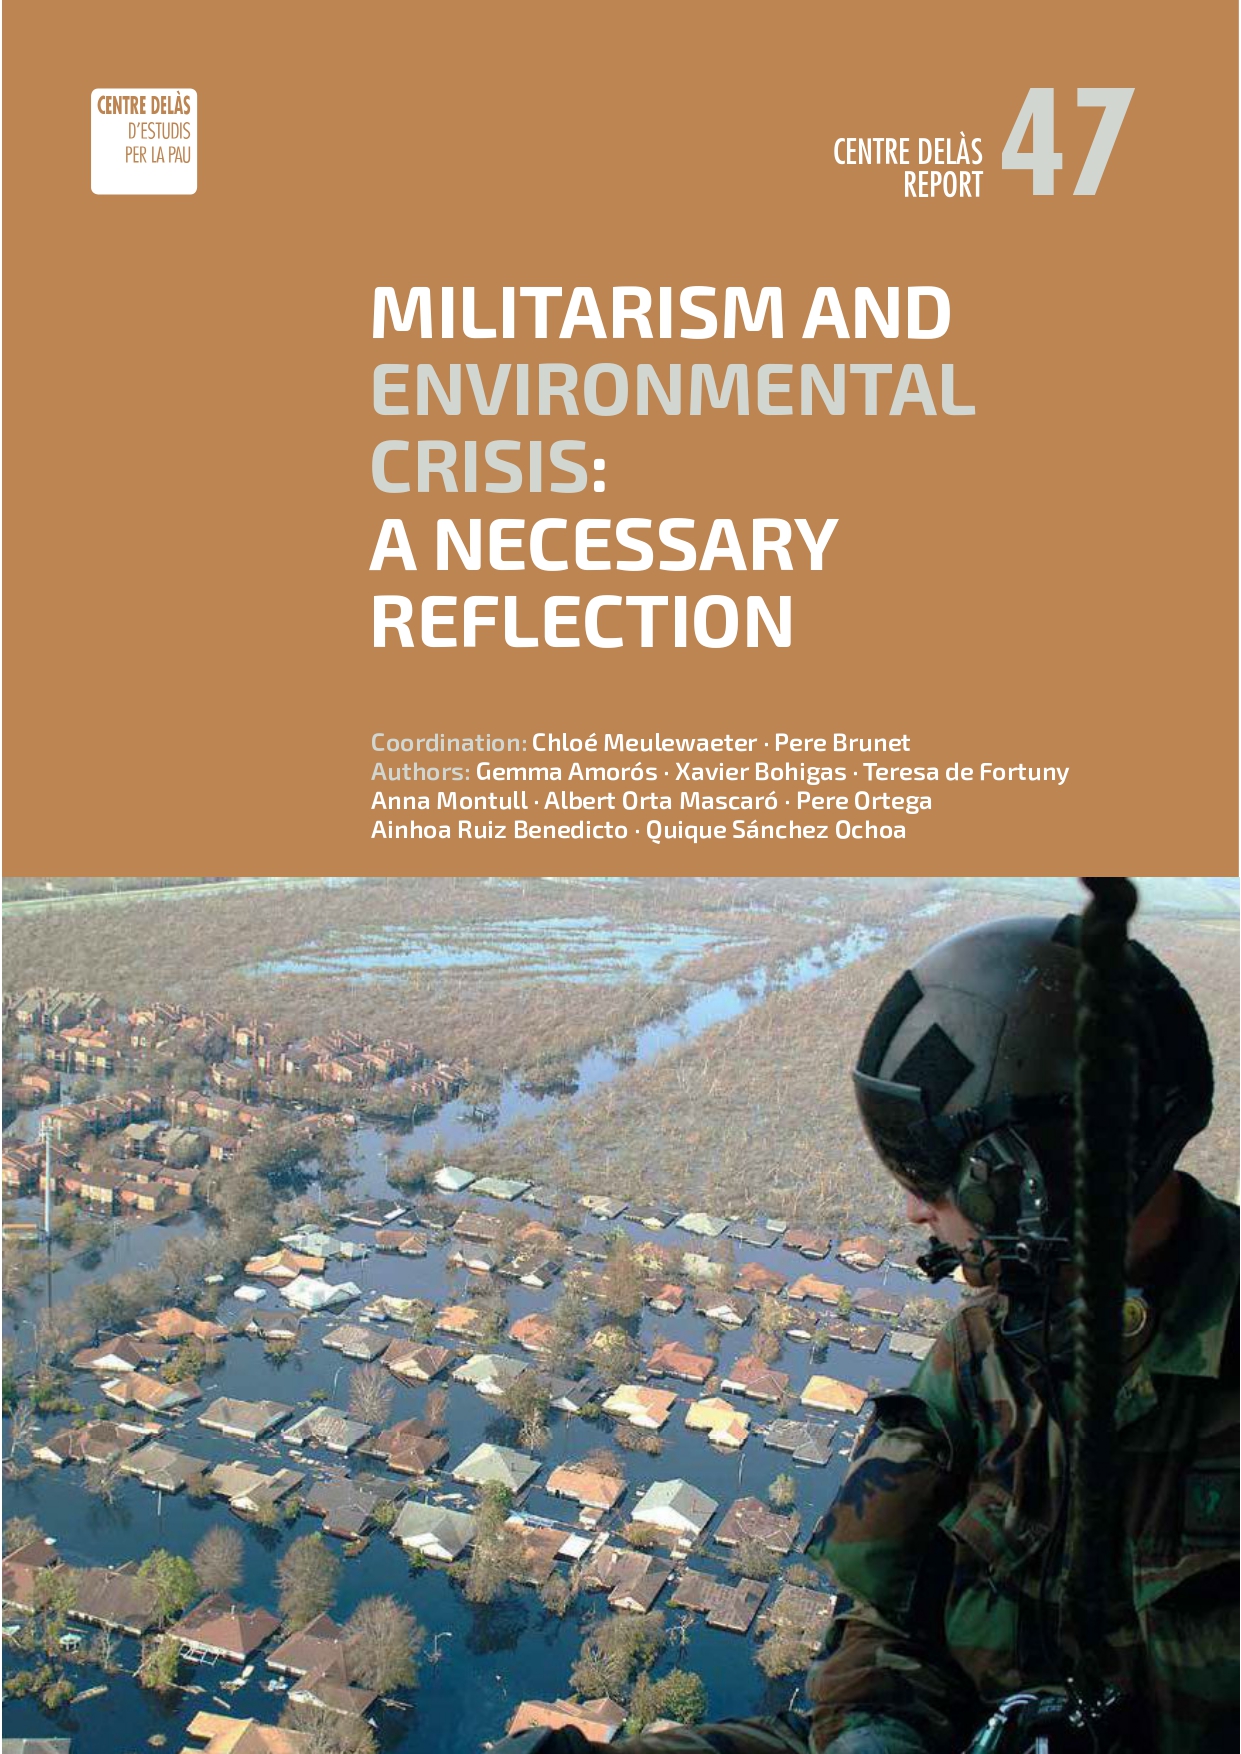 Report 47: “Militarism and environmental crisis. A necessary reflection”